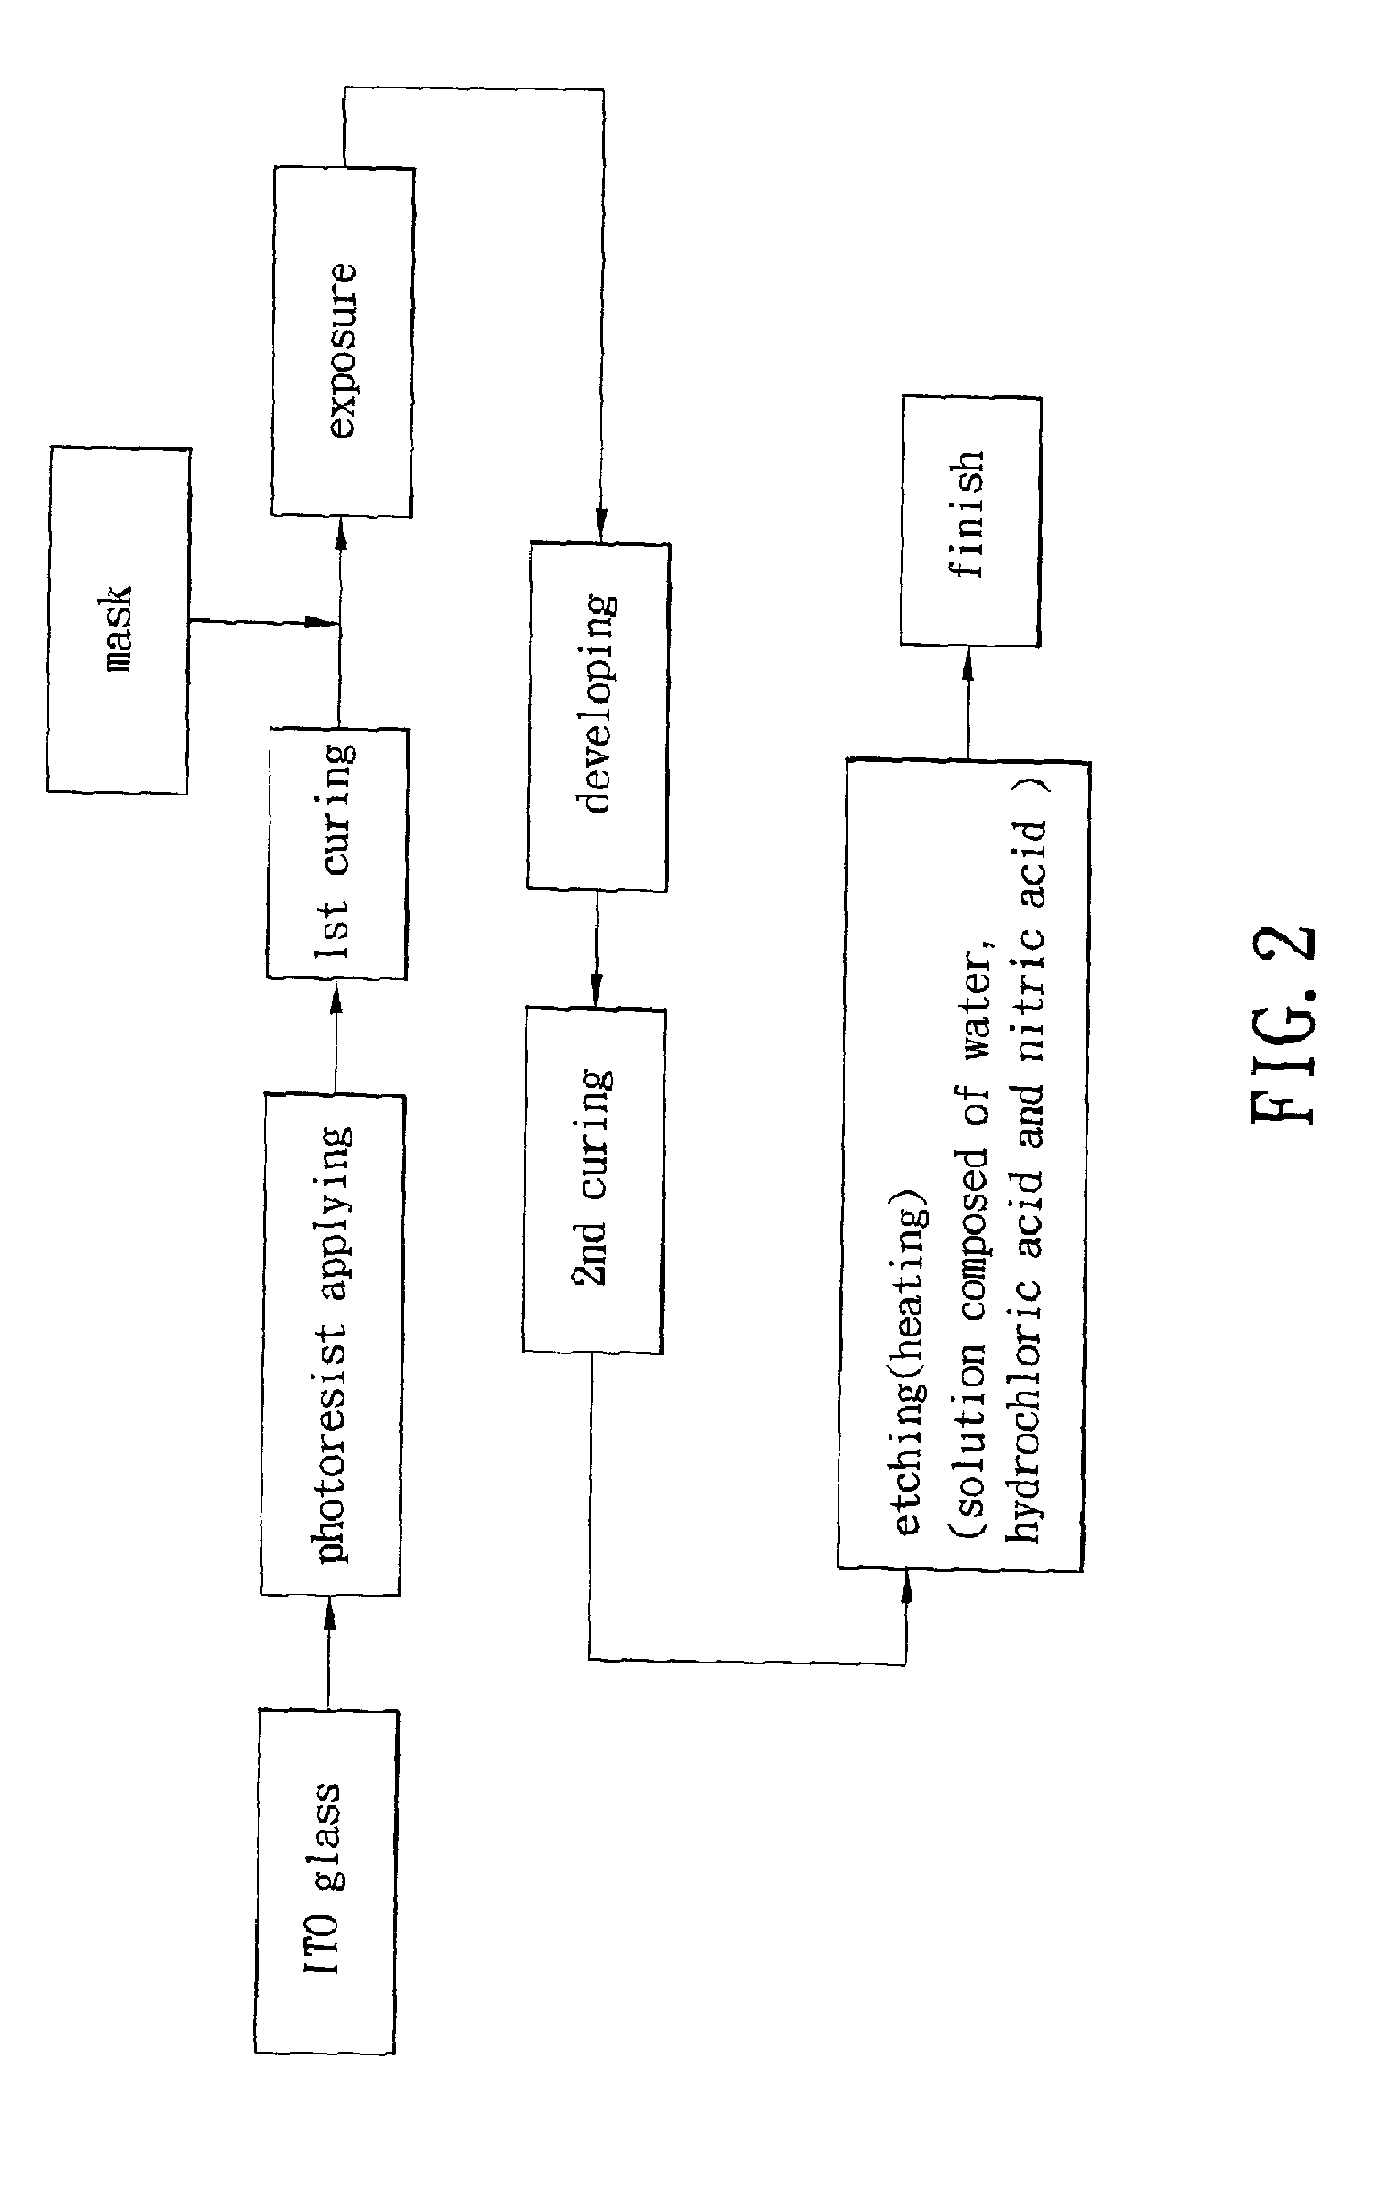 Wireless mobile personal terminal and method of manufacturing printed-on-display antenna for the same